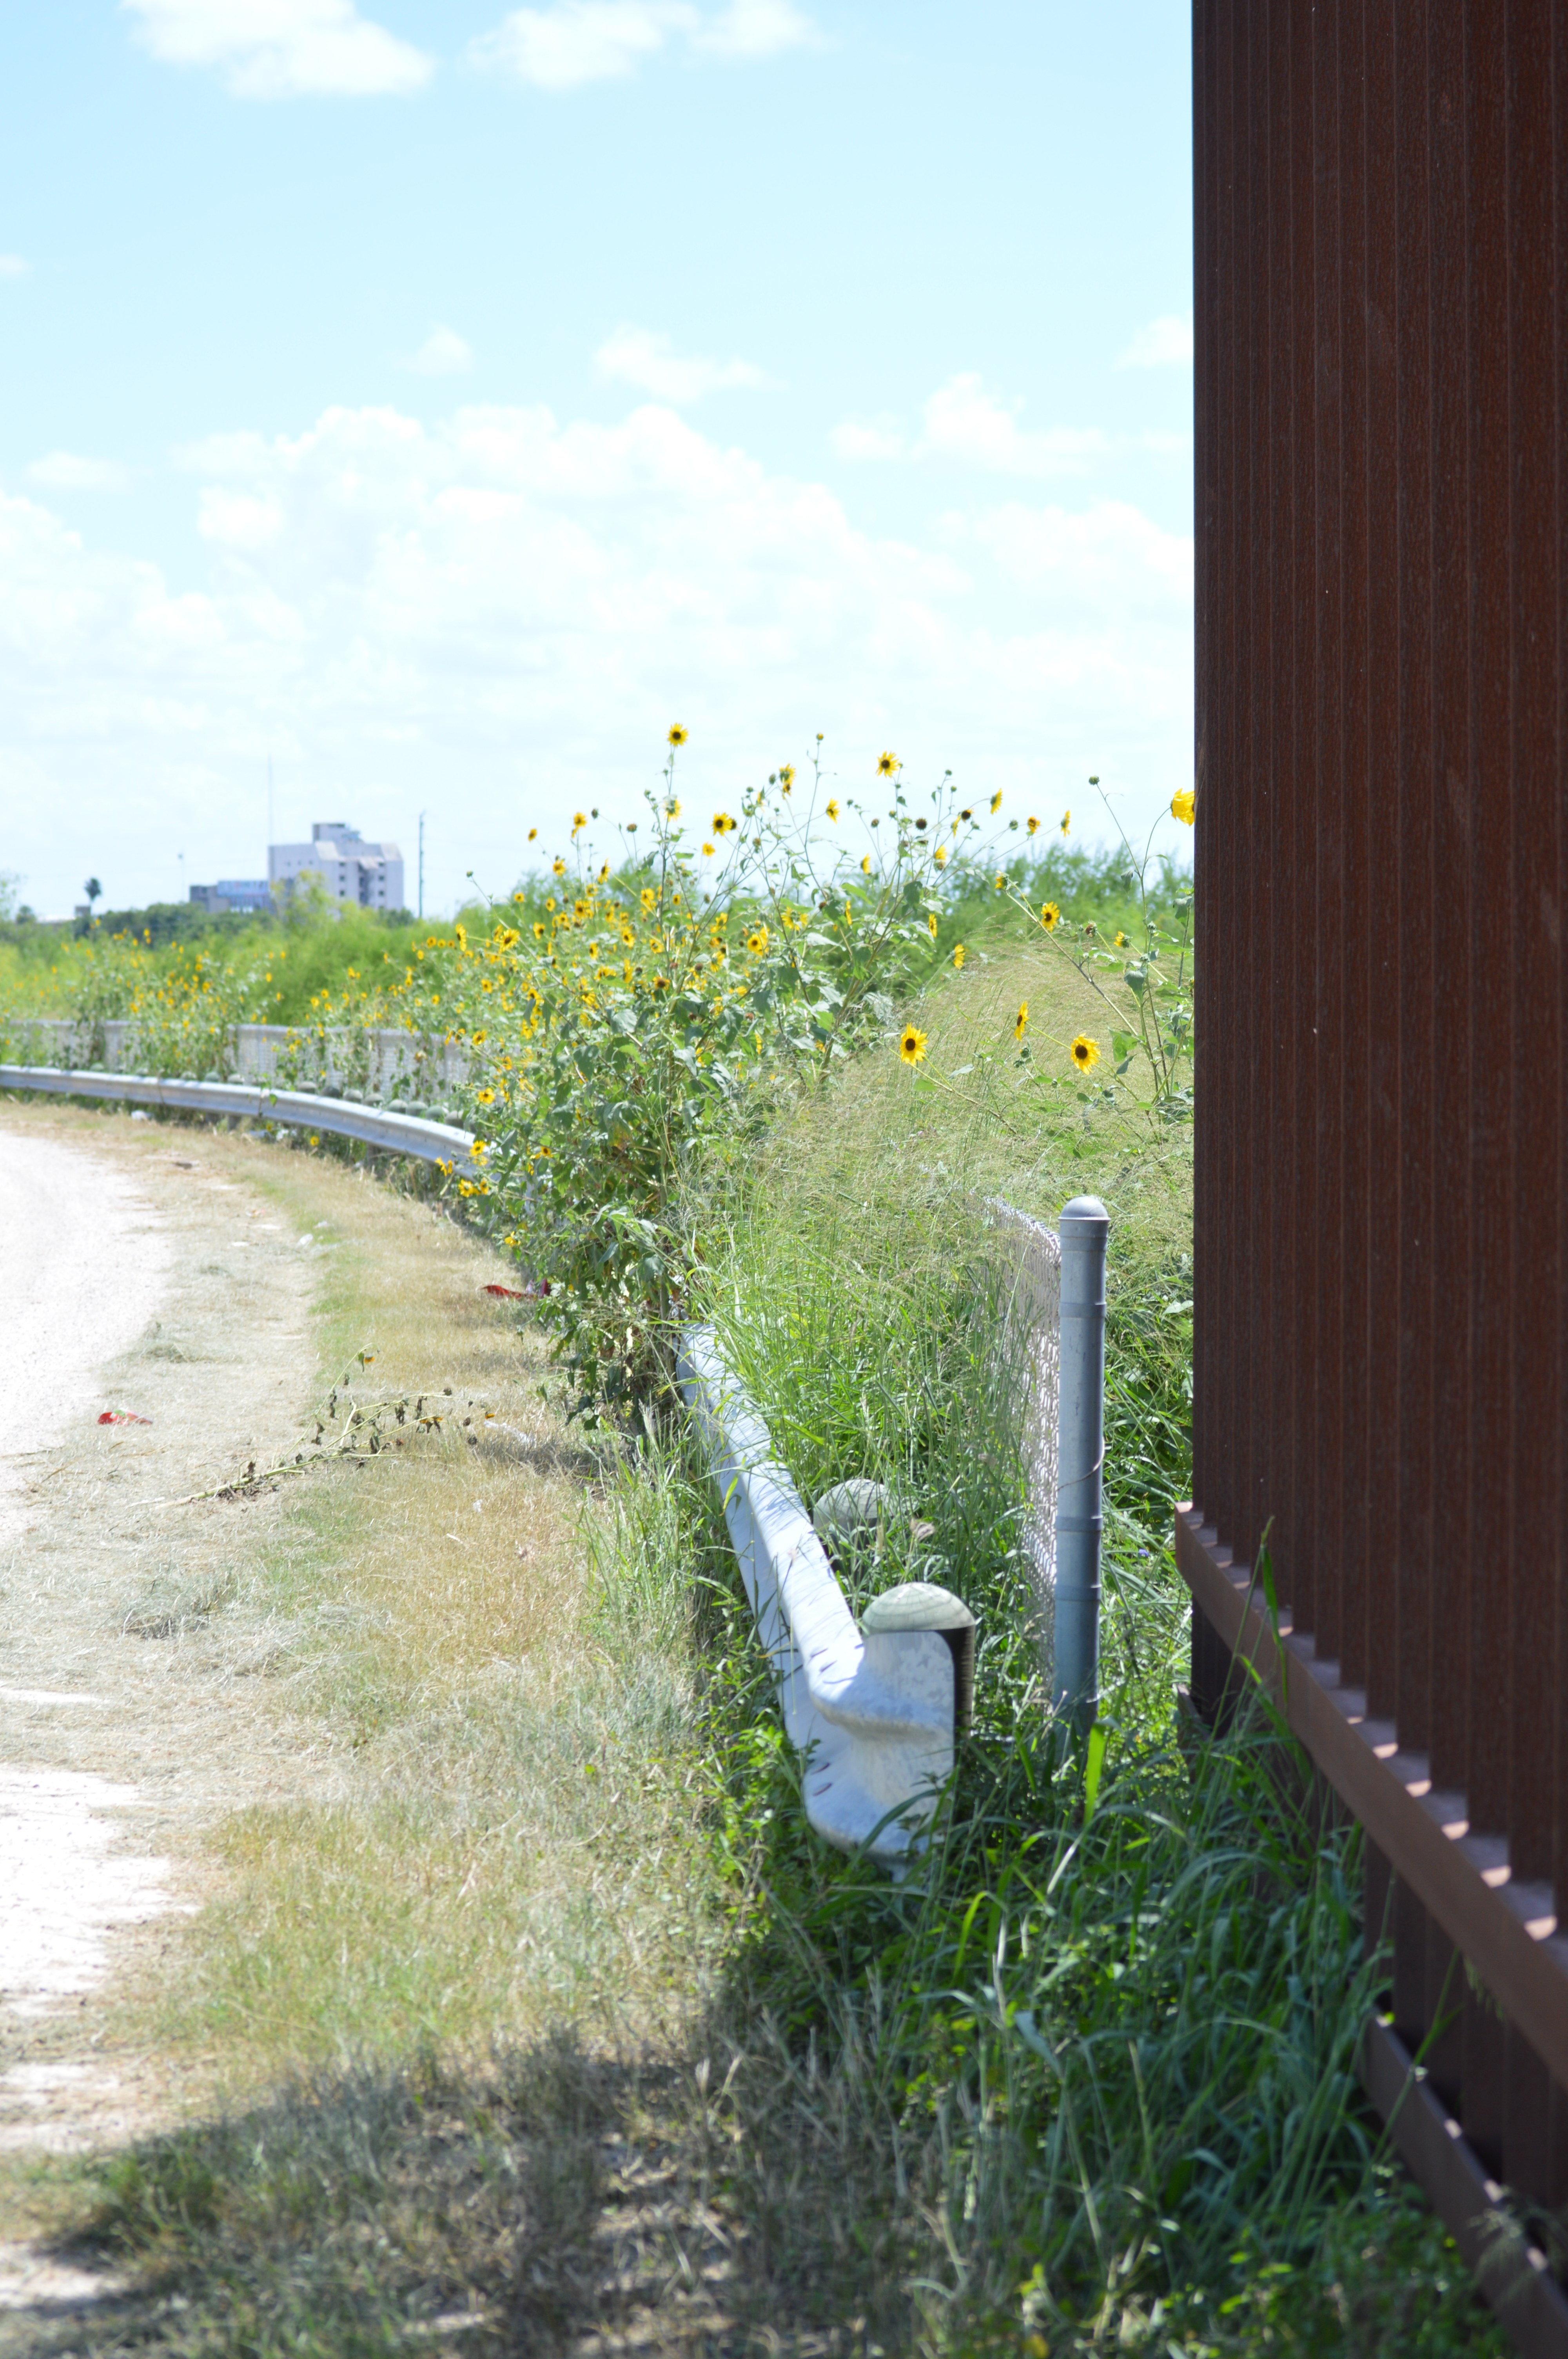 Yellow flowers growing over the border barrier attached to the border wall with Mexico visible in the background